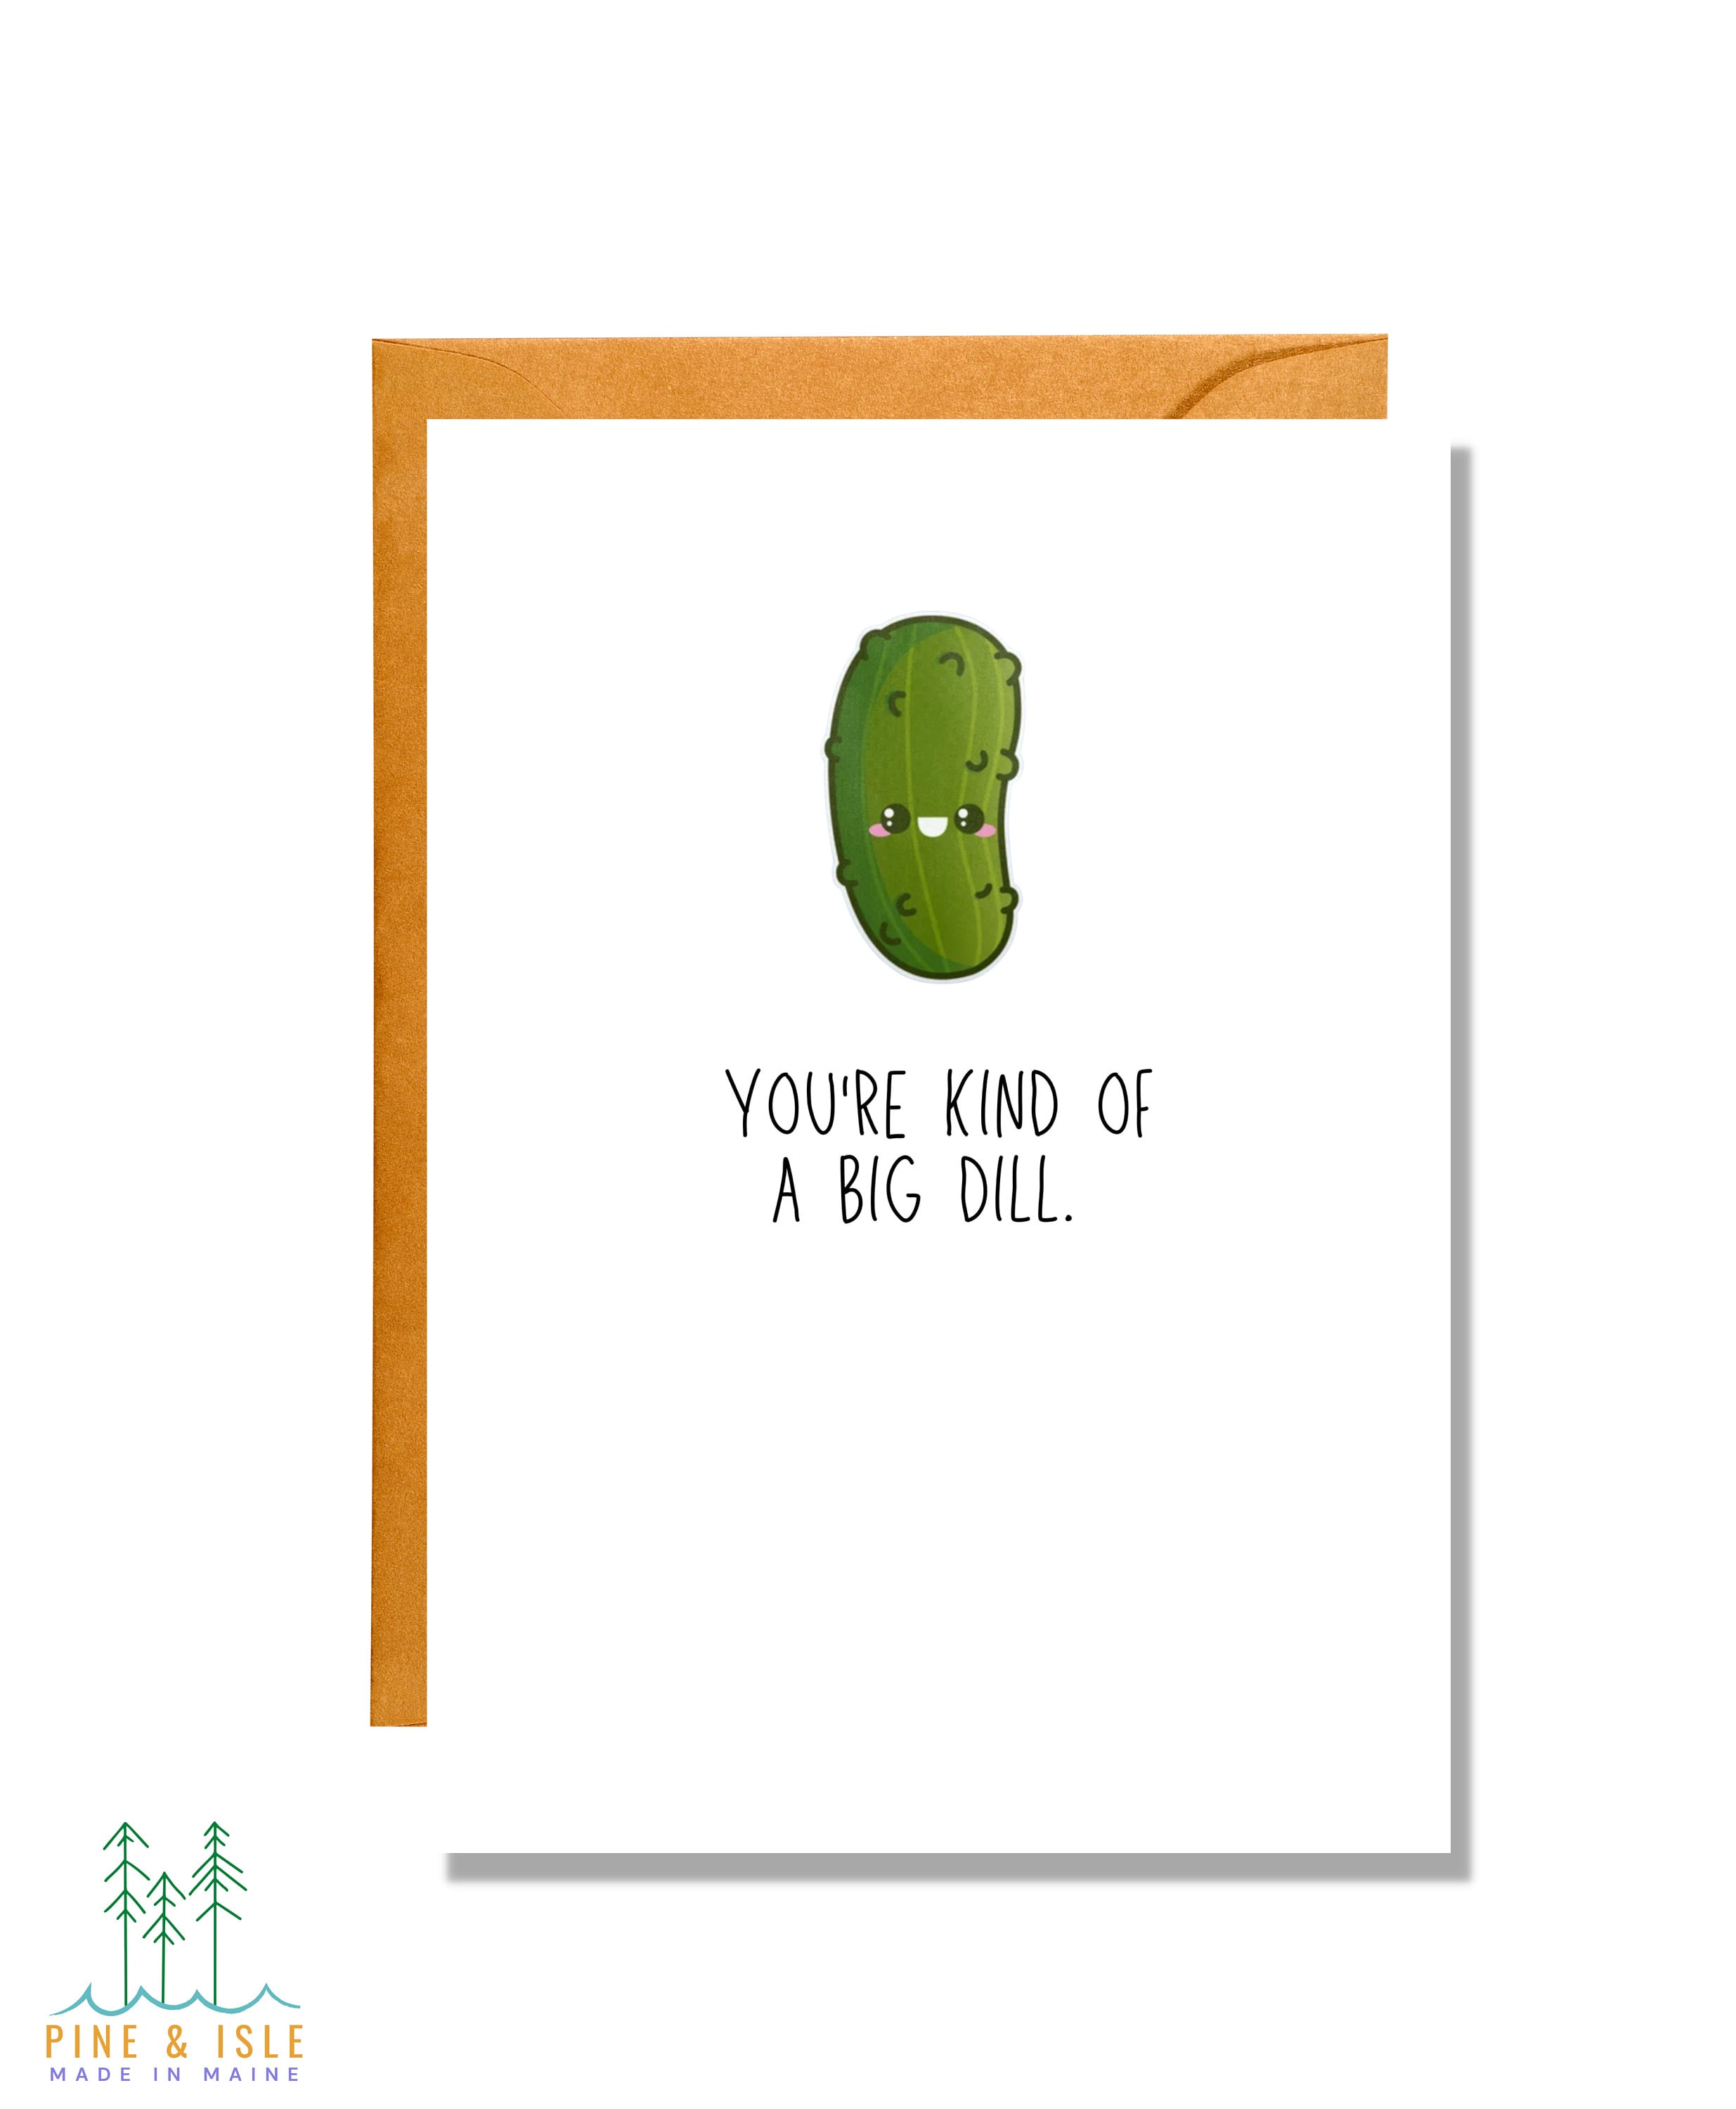 You're Kind of a Big Dill - Made in Virginia Store